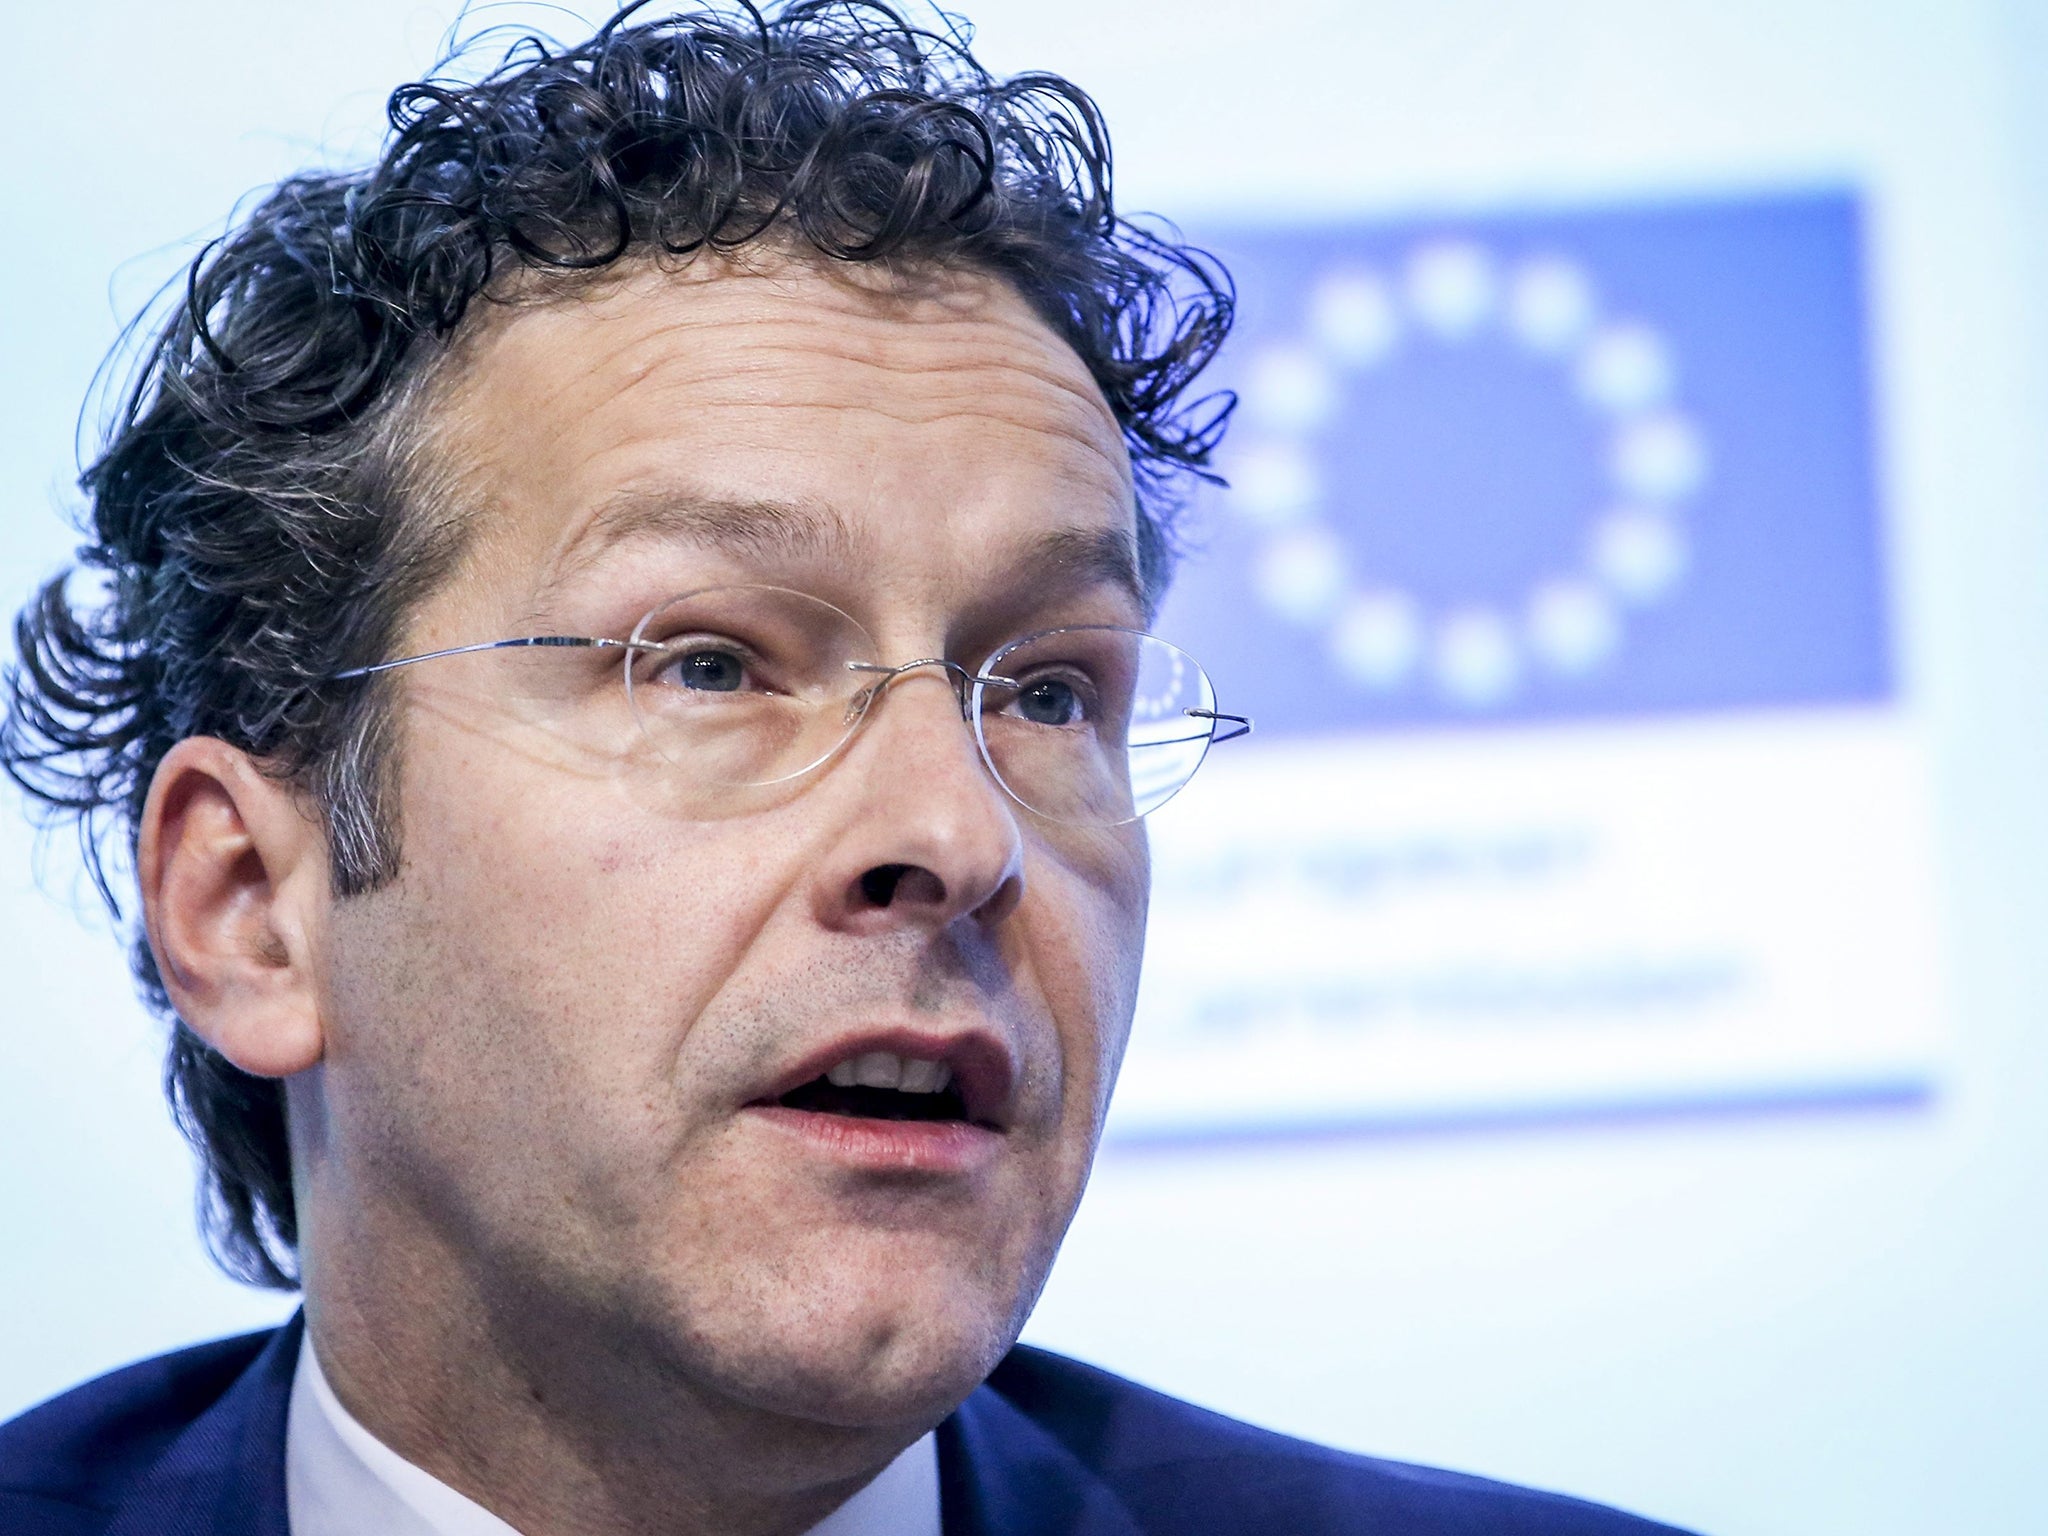 Jeroen Dijsselbloem, head of the Eurogroup nations which use the single currency said that no discount had been negotiated